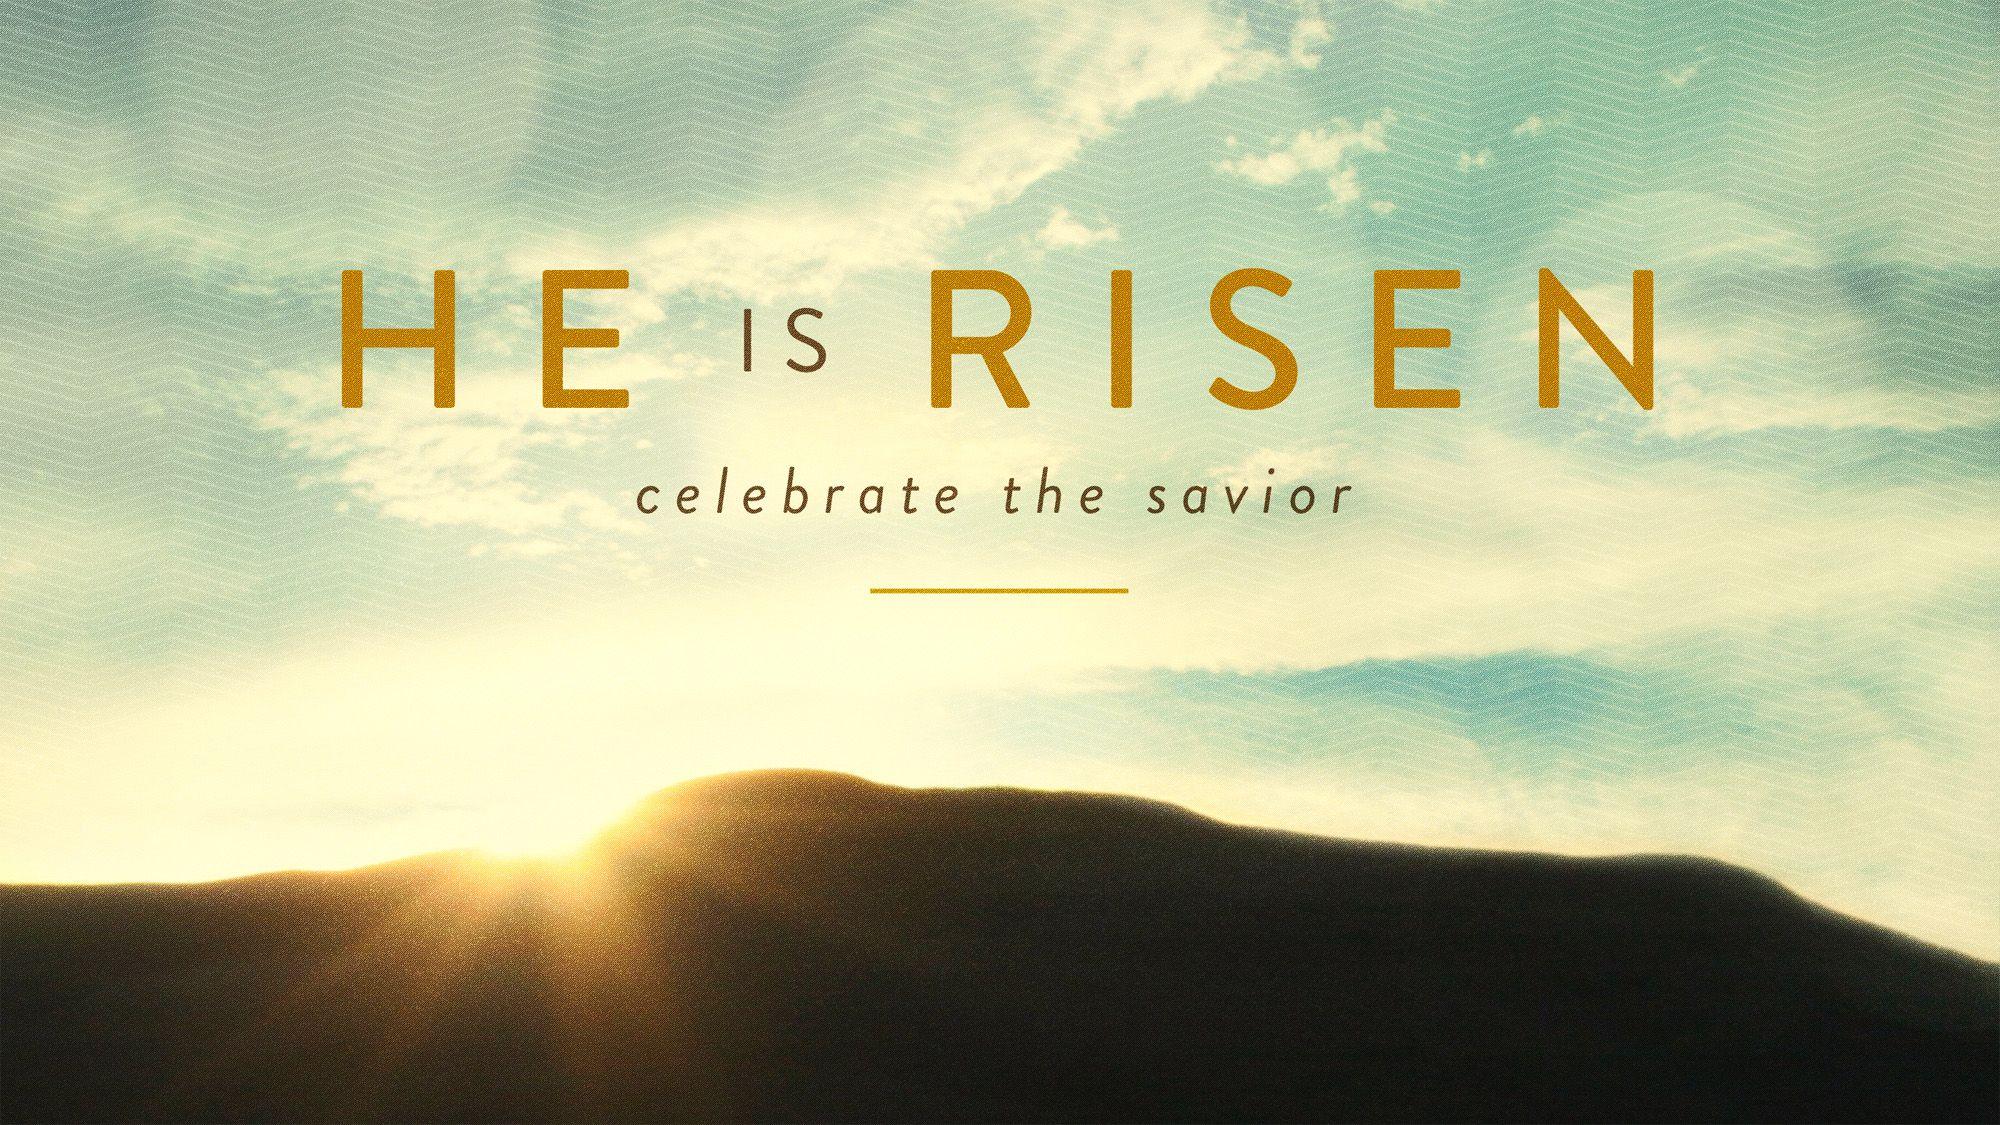 He Is Risen Wallpapers Top Free He Is Risen Backgrounds Wallpaperaccess 